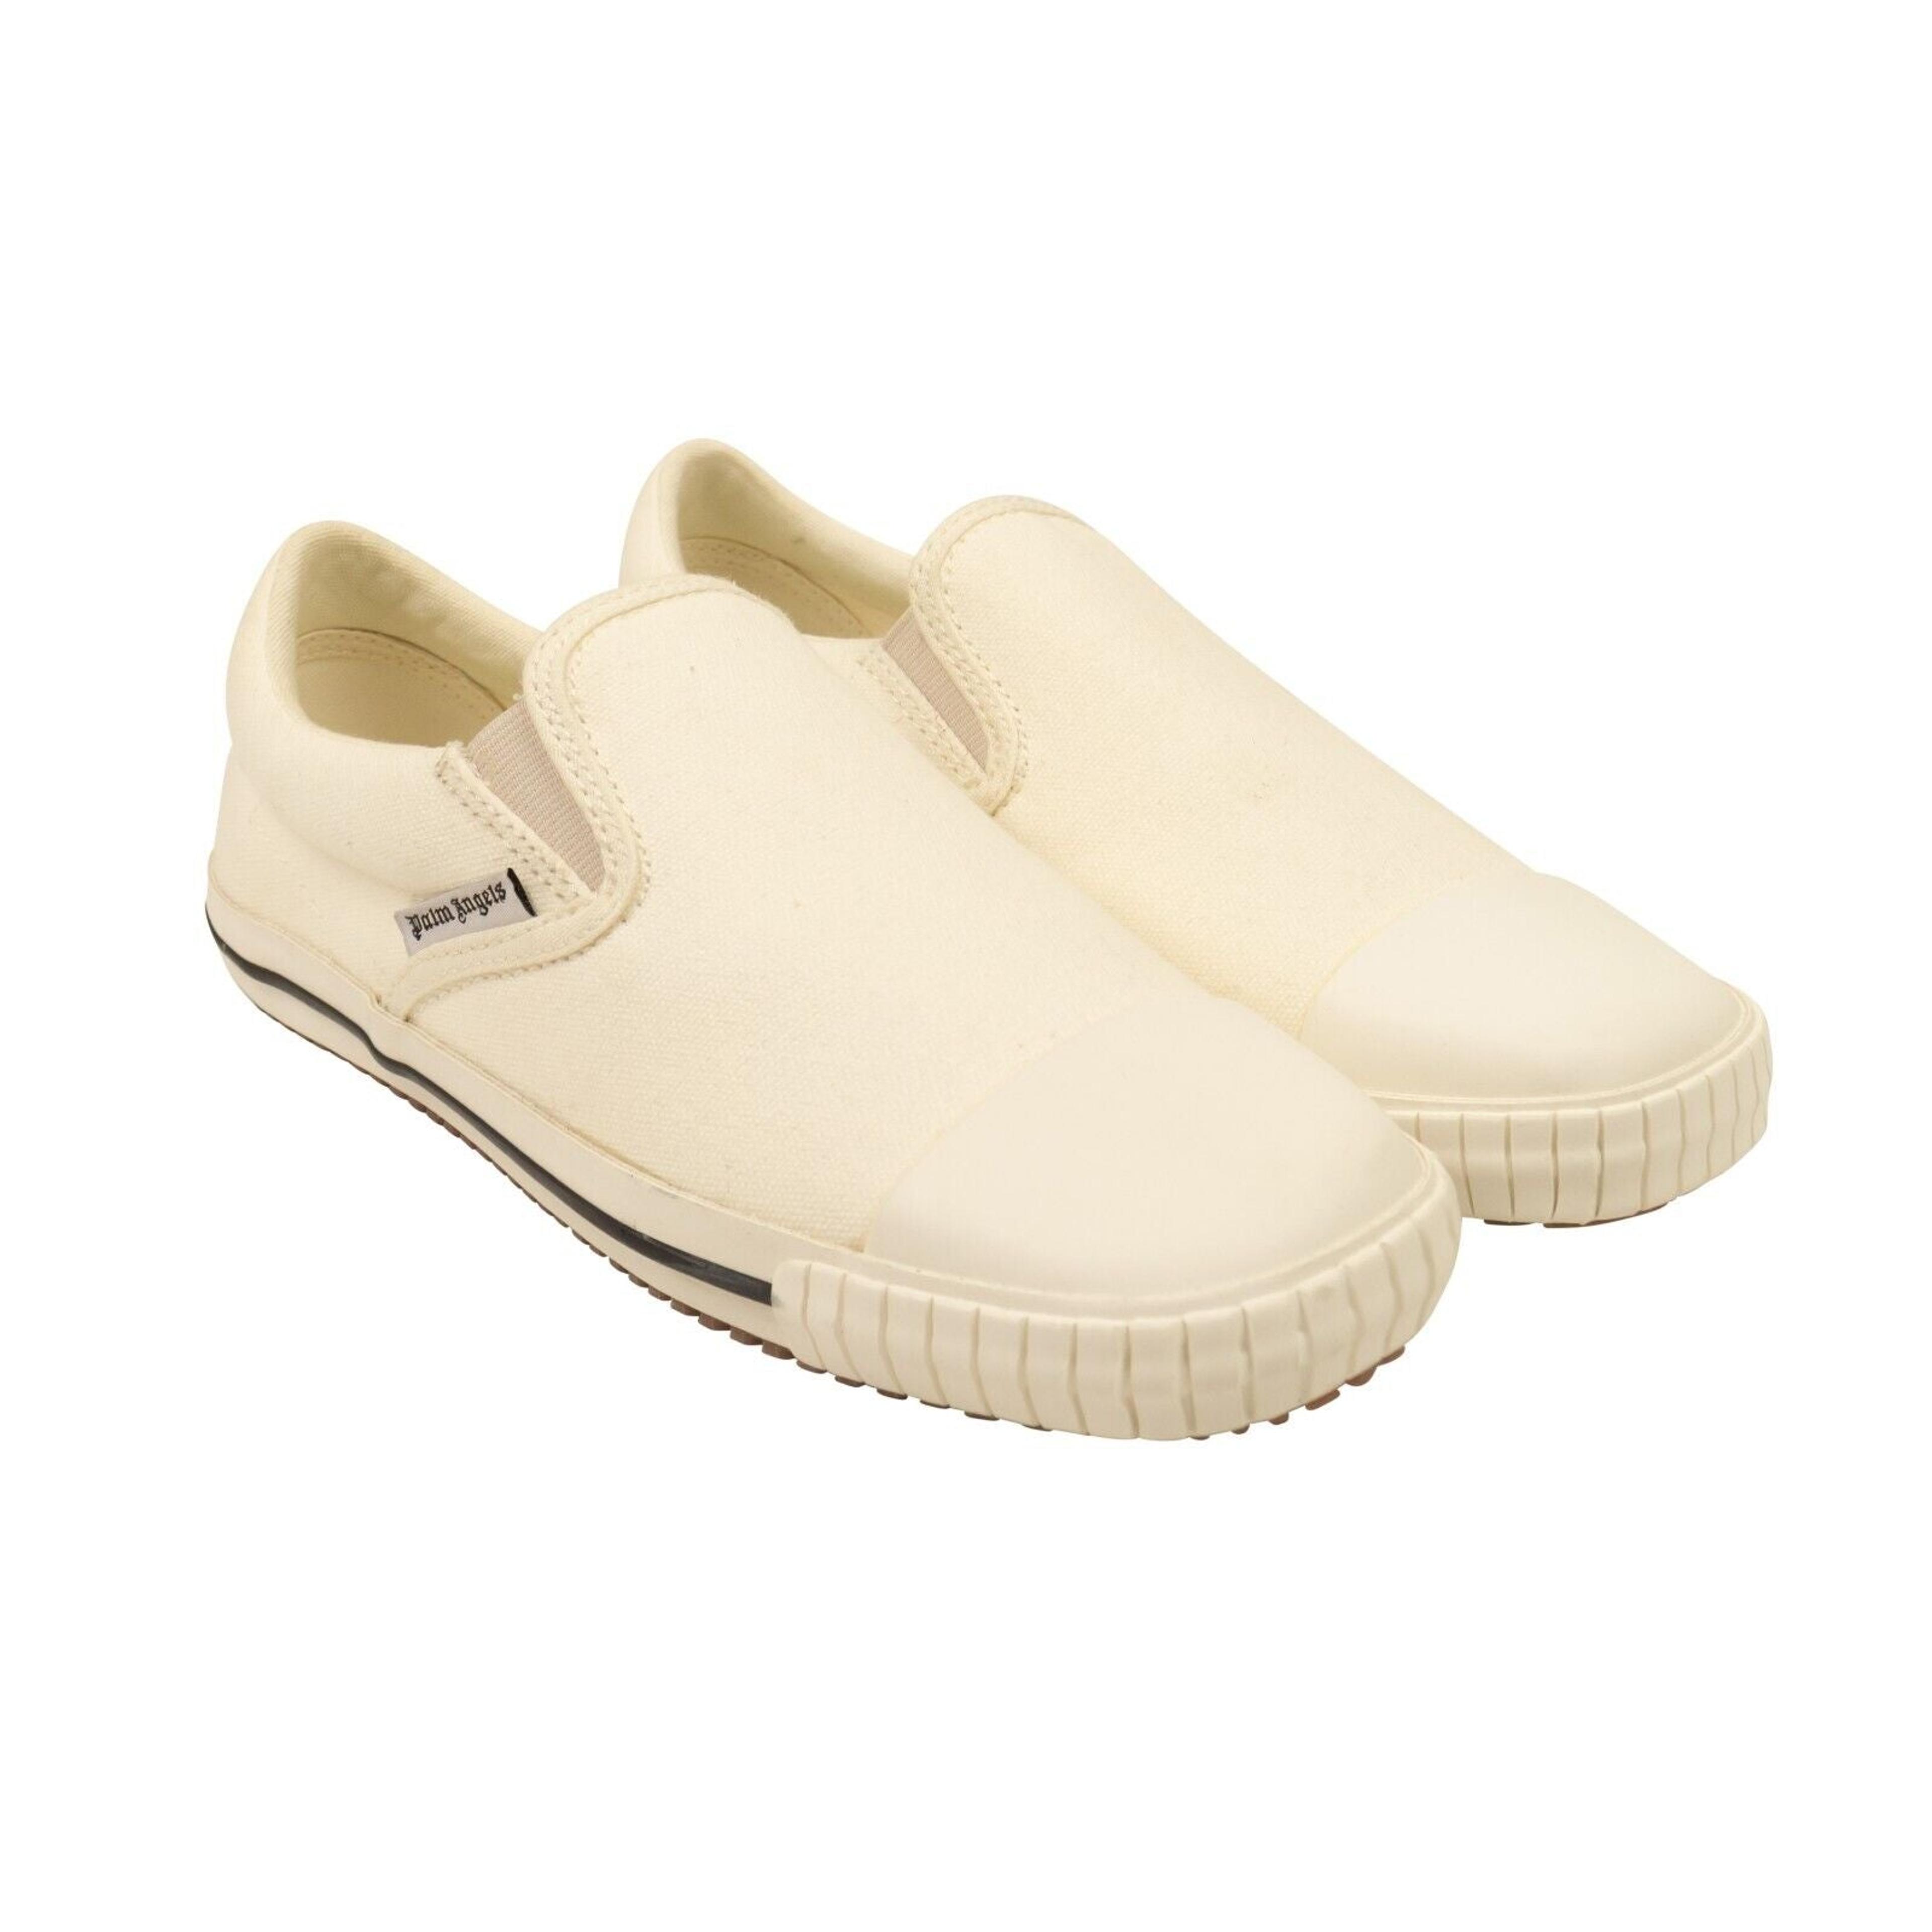 Alternate View 2 of White Vulcanized Square Slip On Canvas Sneakers